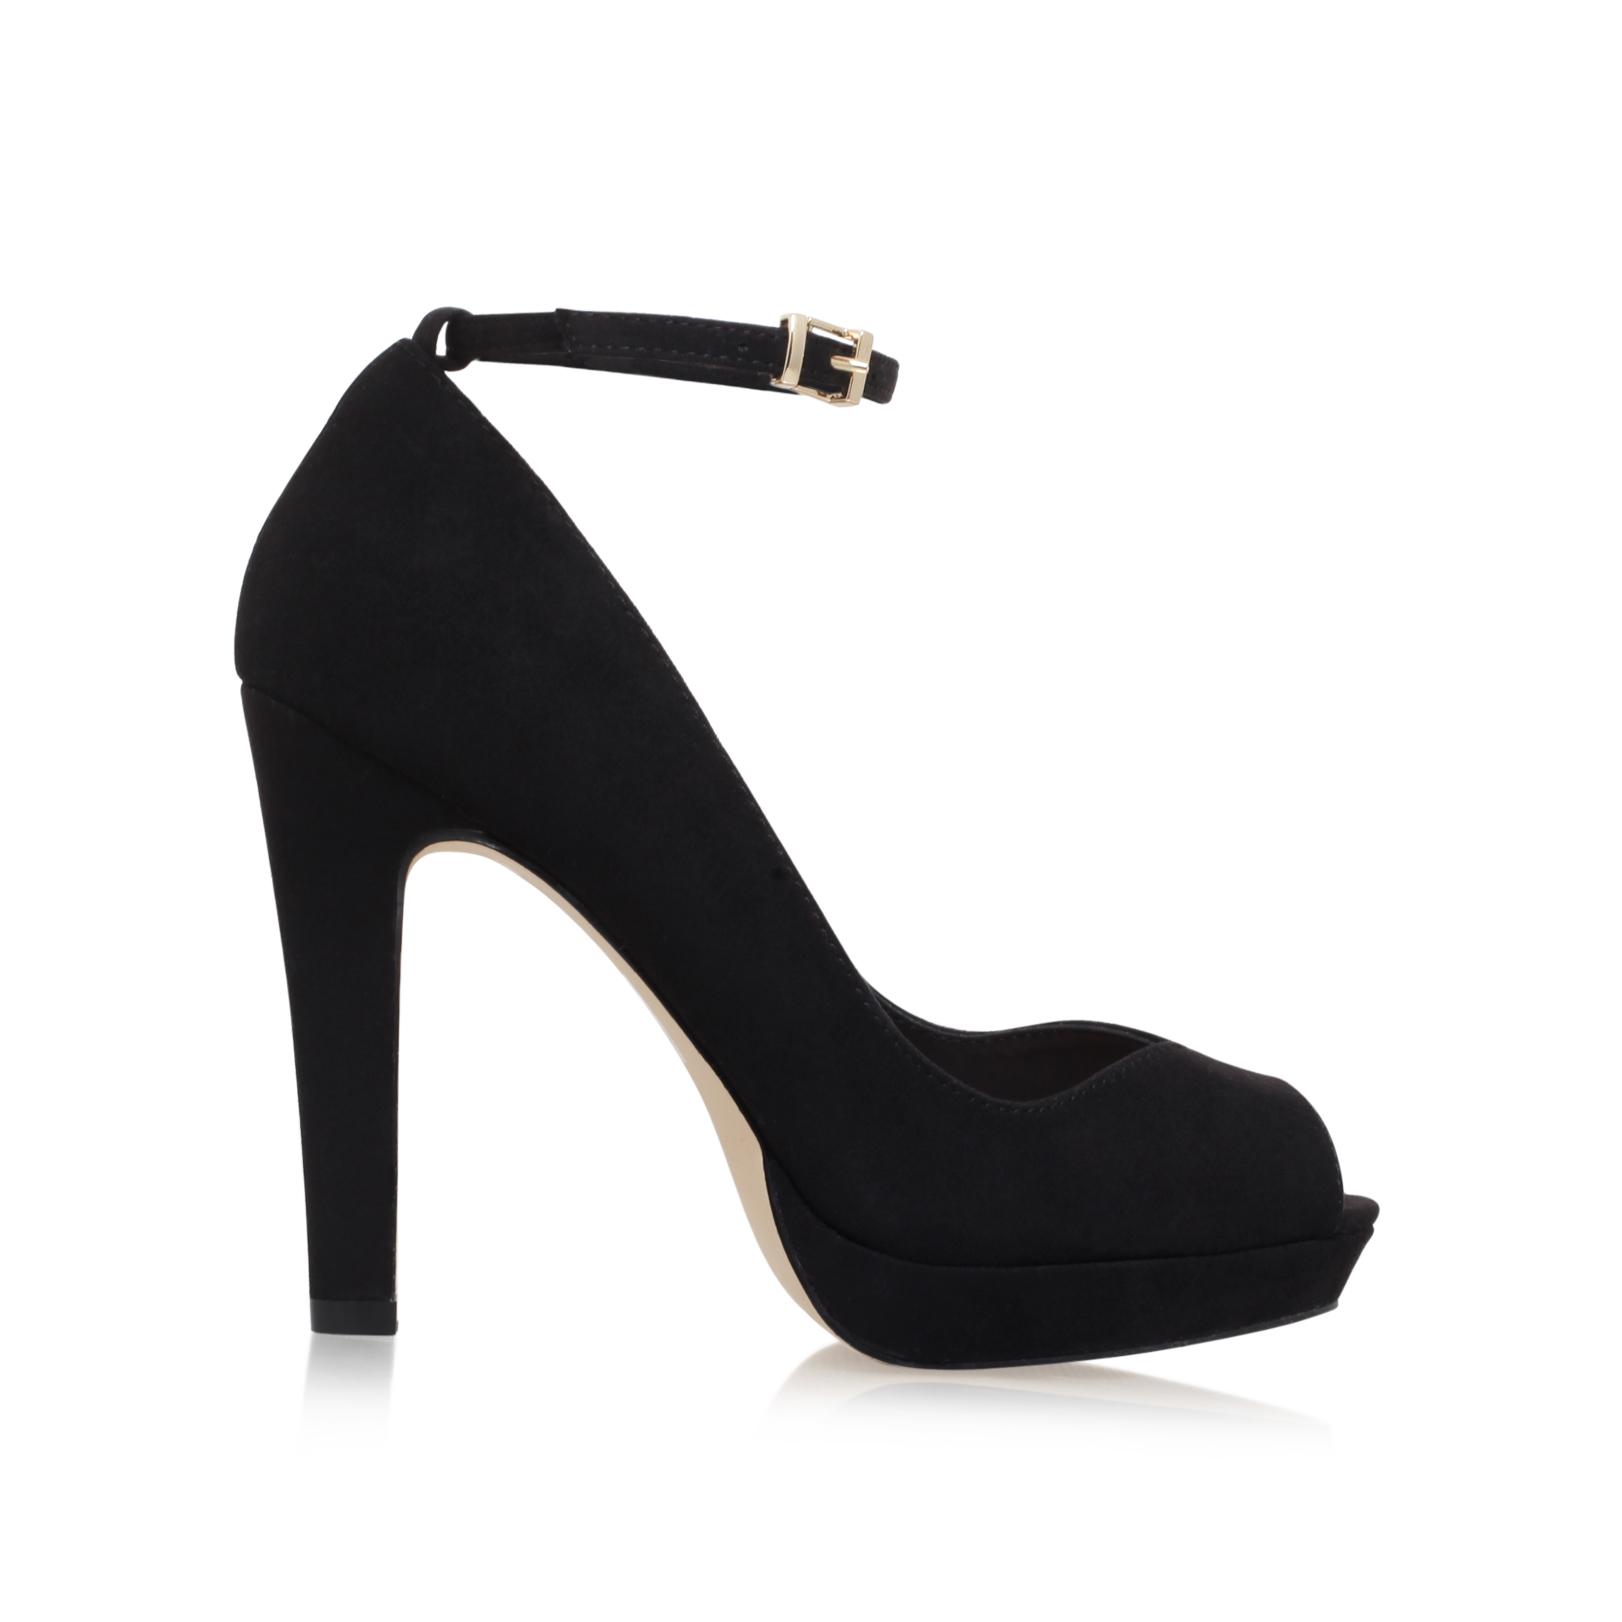 Miss Kg Anete Black High Heel Court Shoes - Lyst